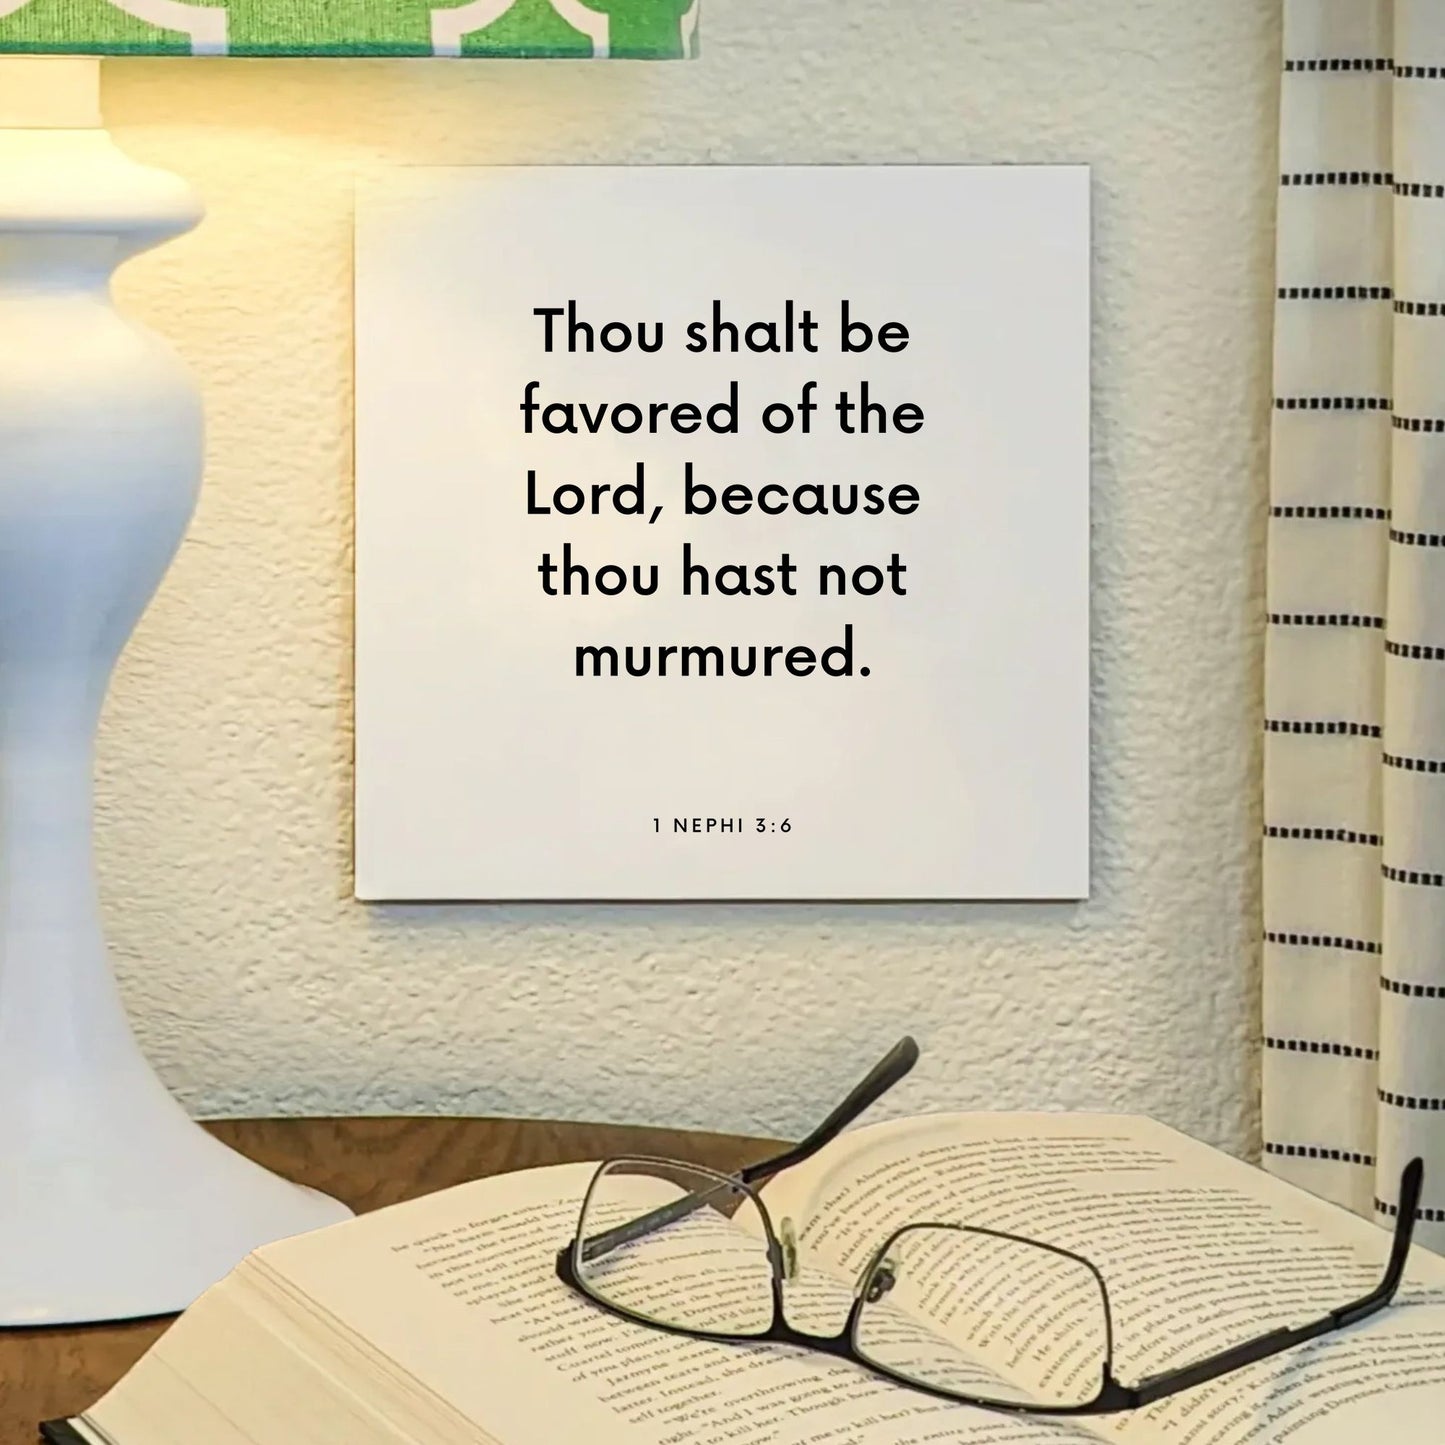 Lamp mouting of the scripture tile for 1 Nephi 3:6 - "Thou shalt be favored of the Lord"